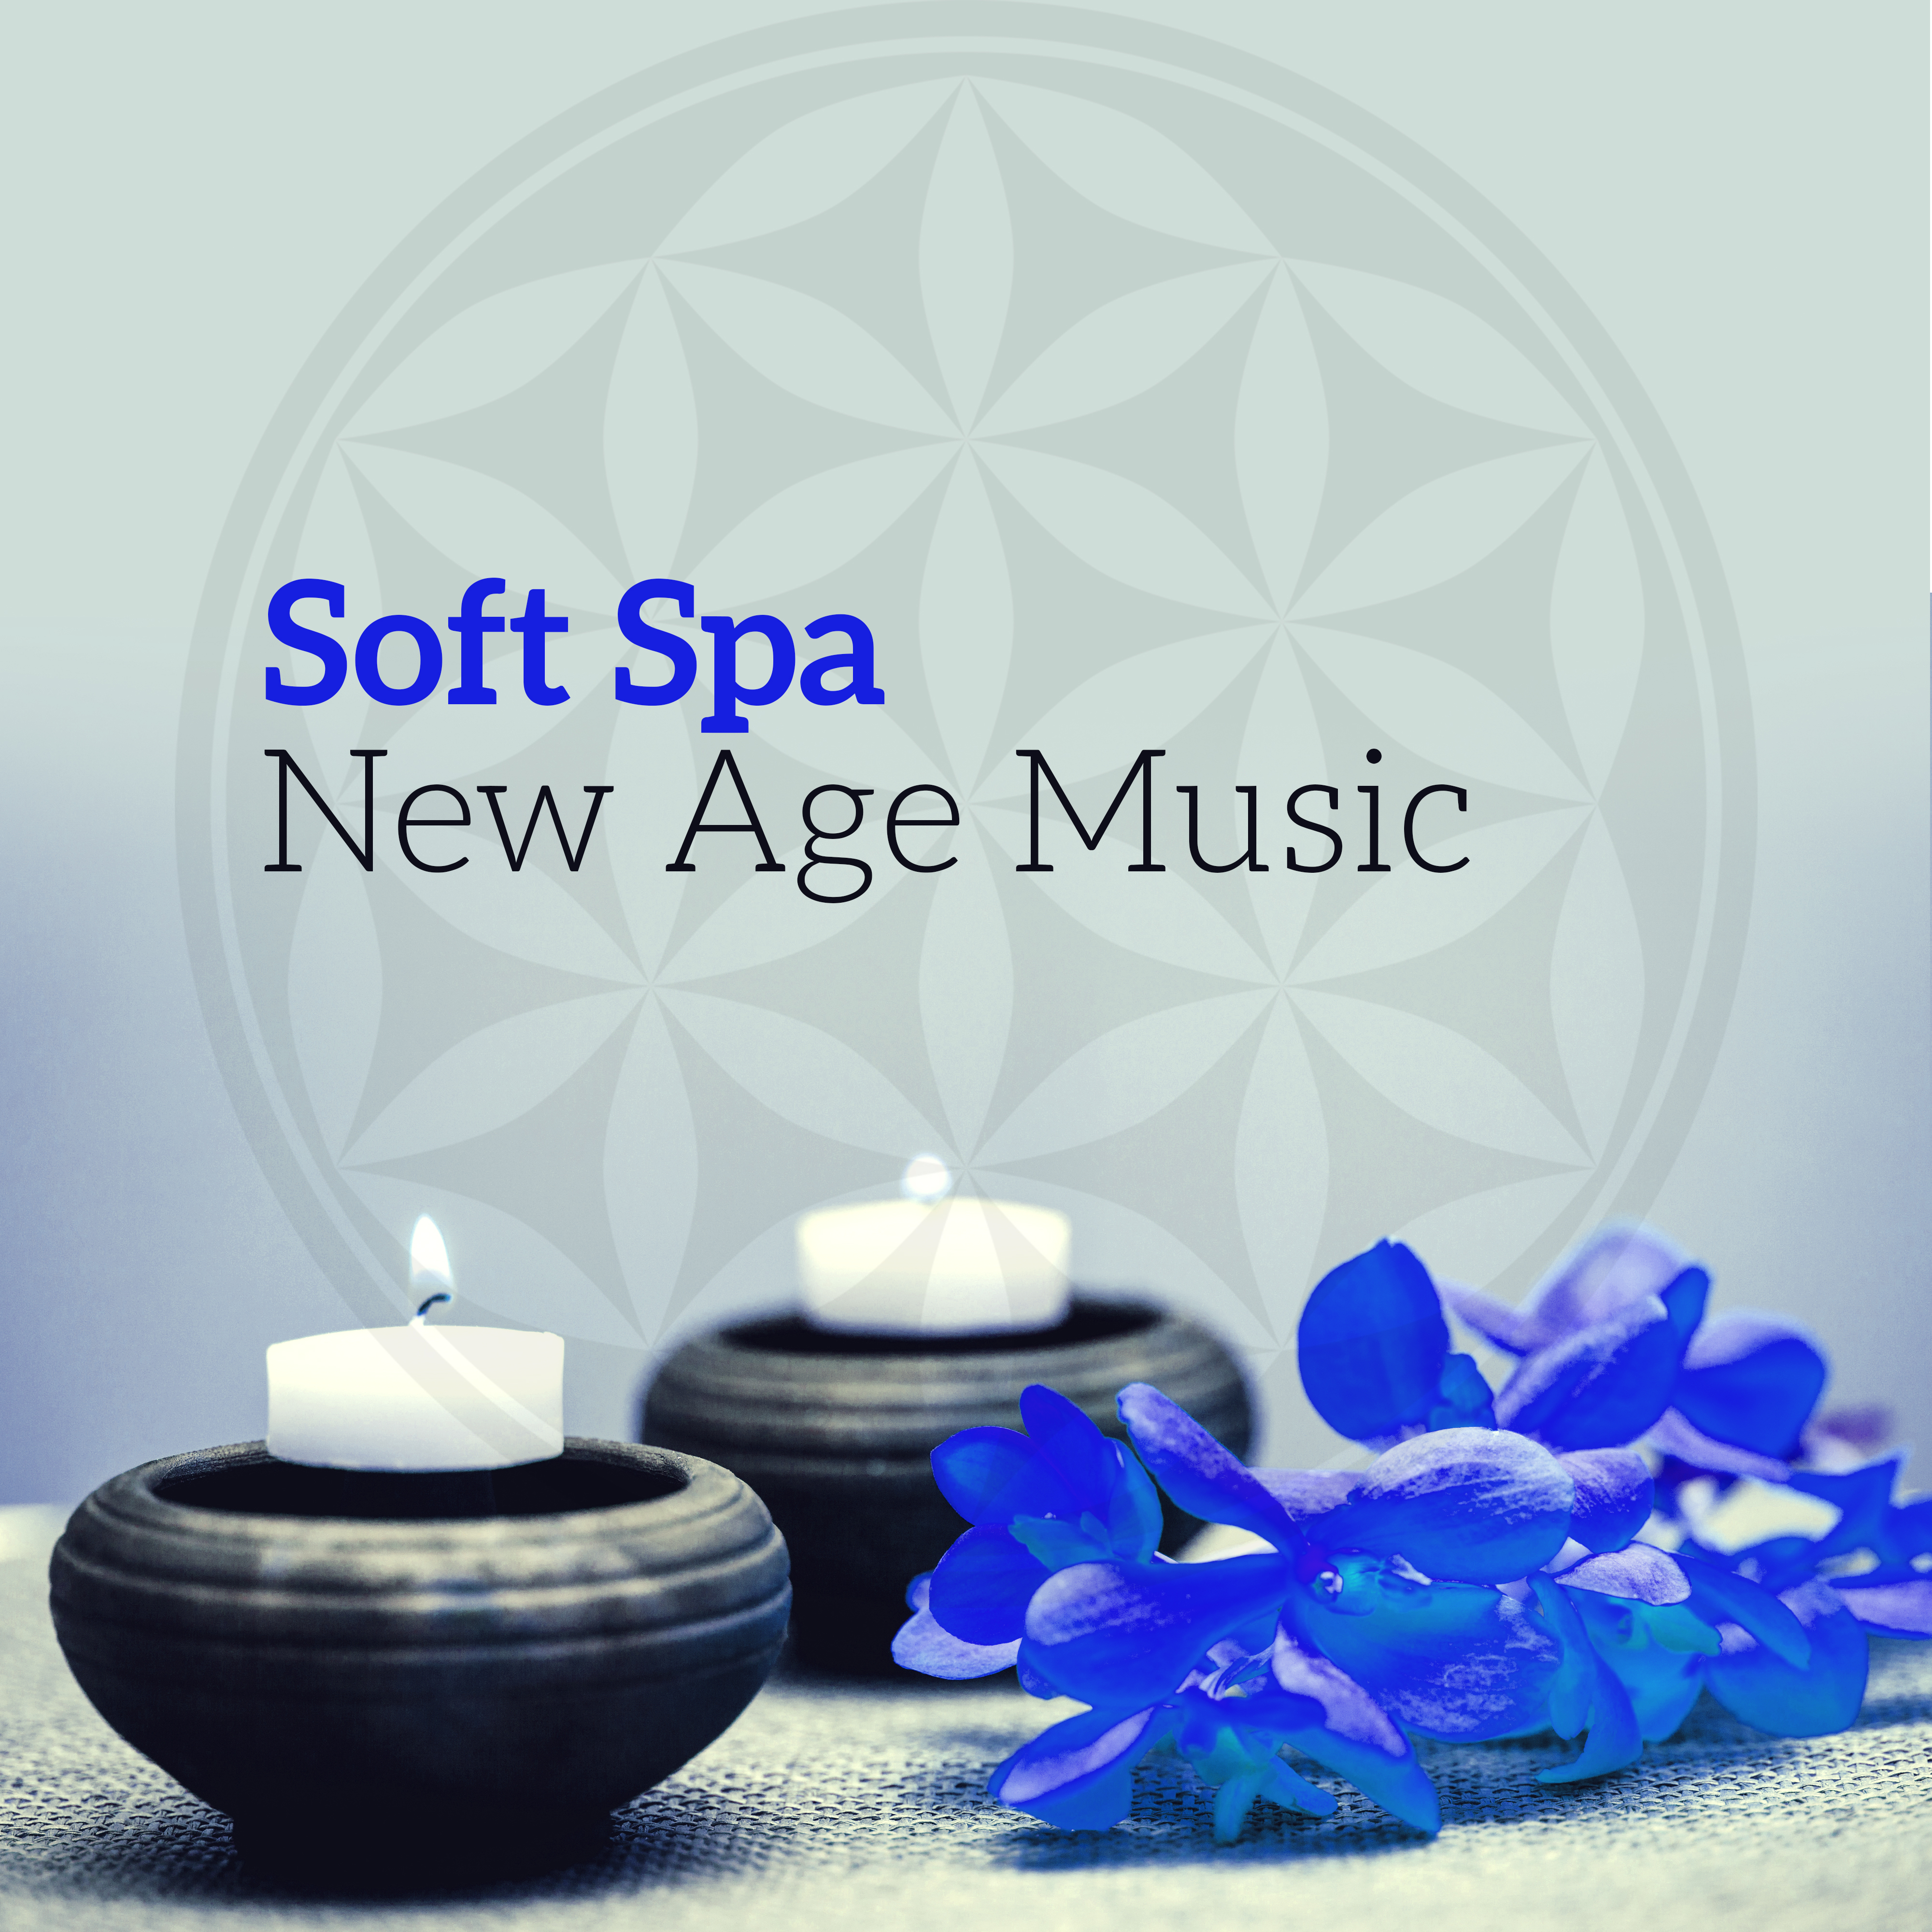 Soft Spa New Age Music